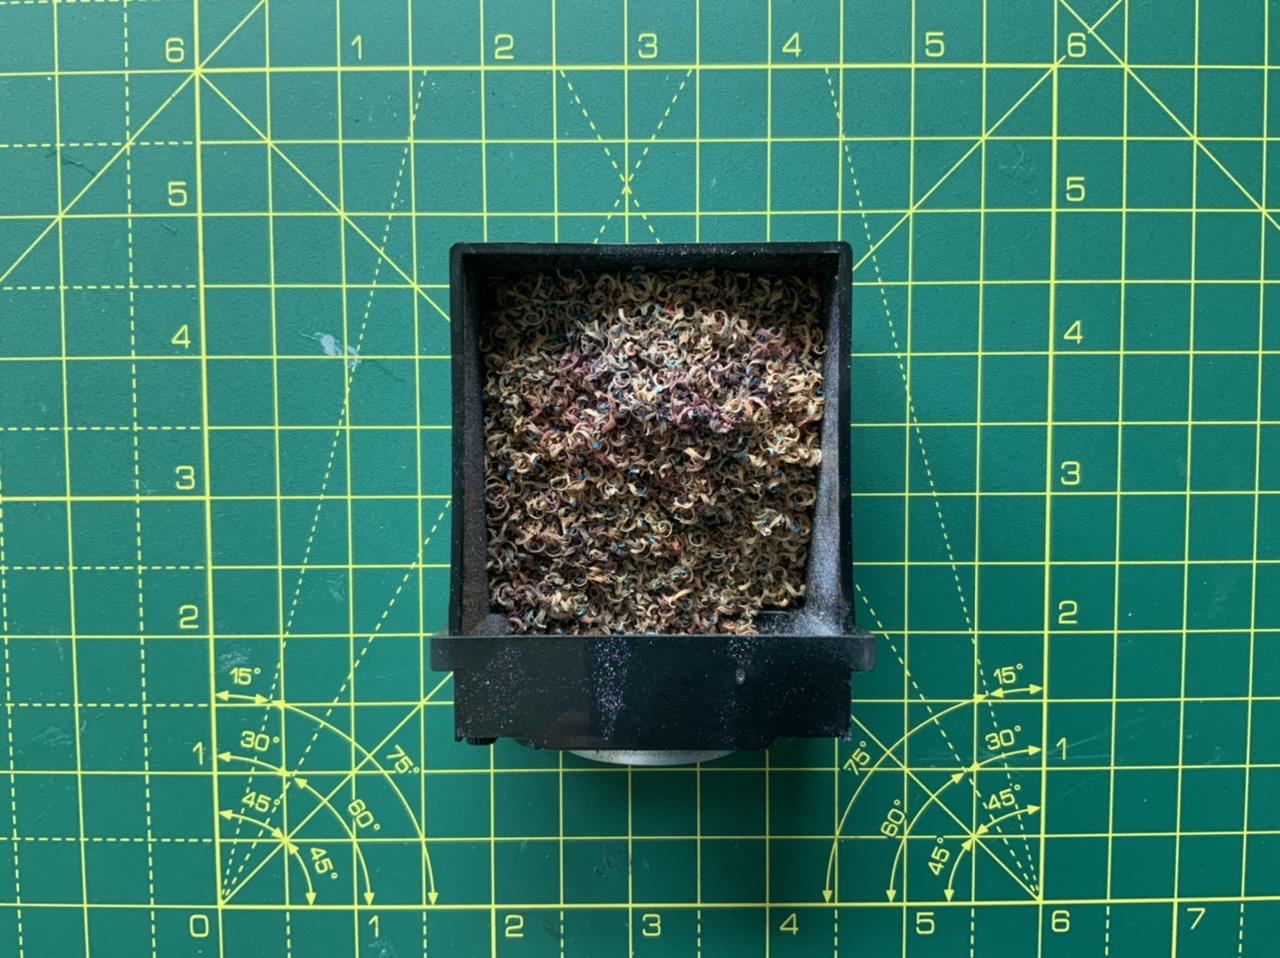 A photo of pencil shavings in a pencil sharpener